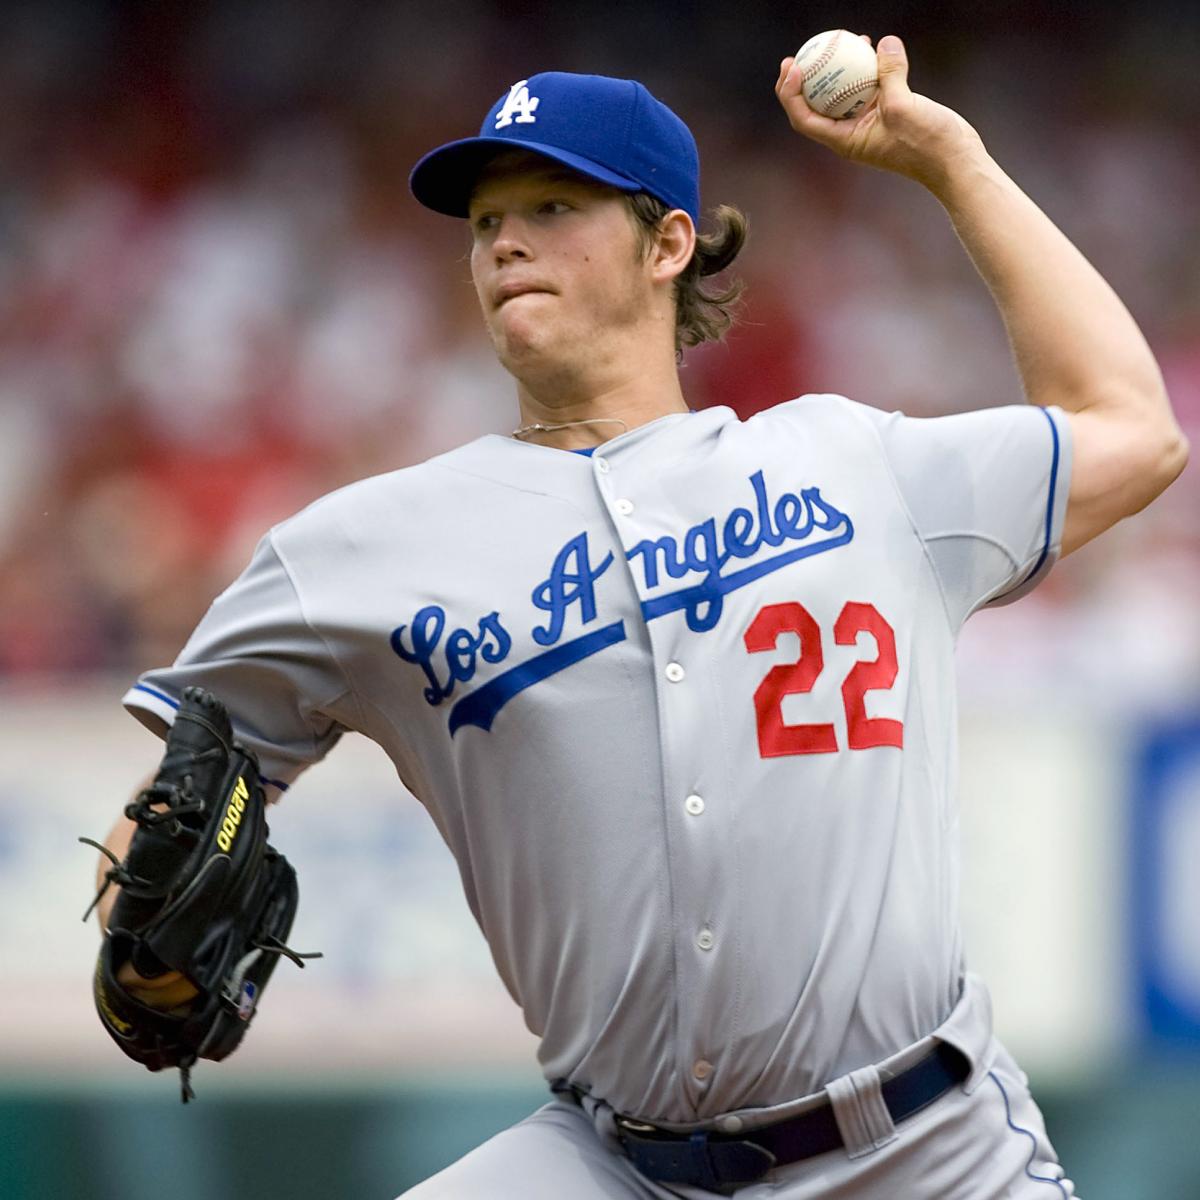 LA Dodgers Pitcher Clayton Kershaw Inspires Young Fan Whose Grandfather Died